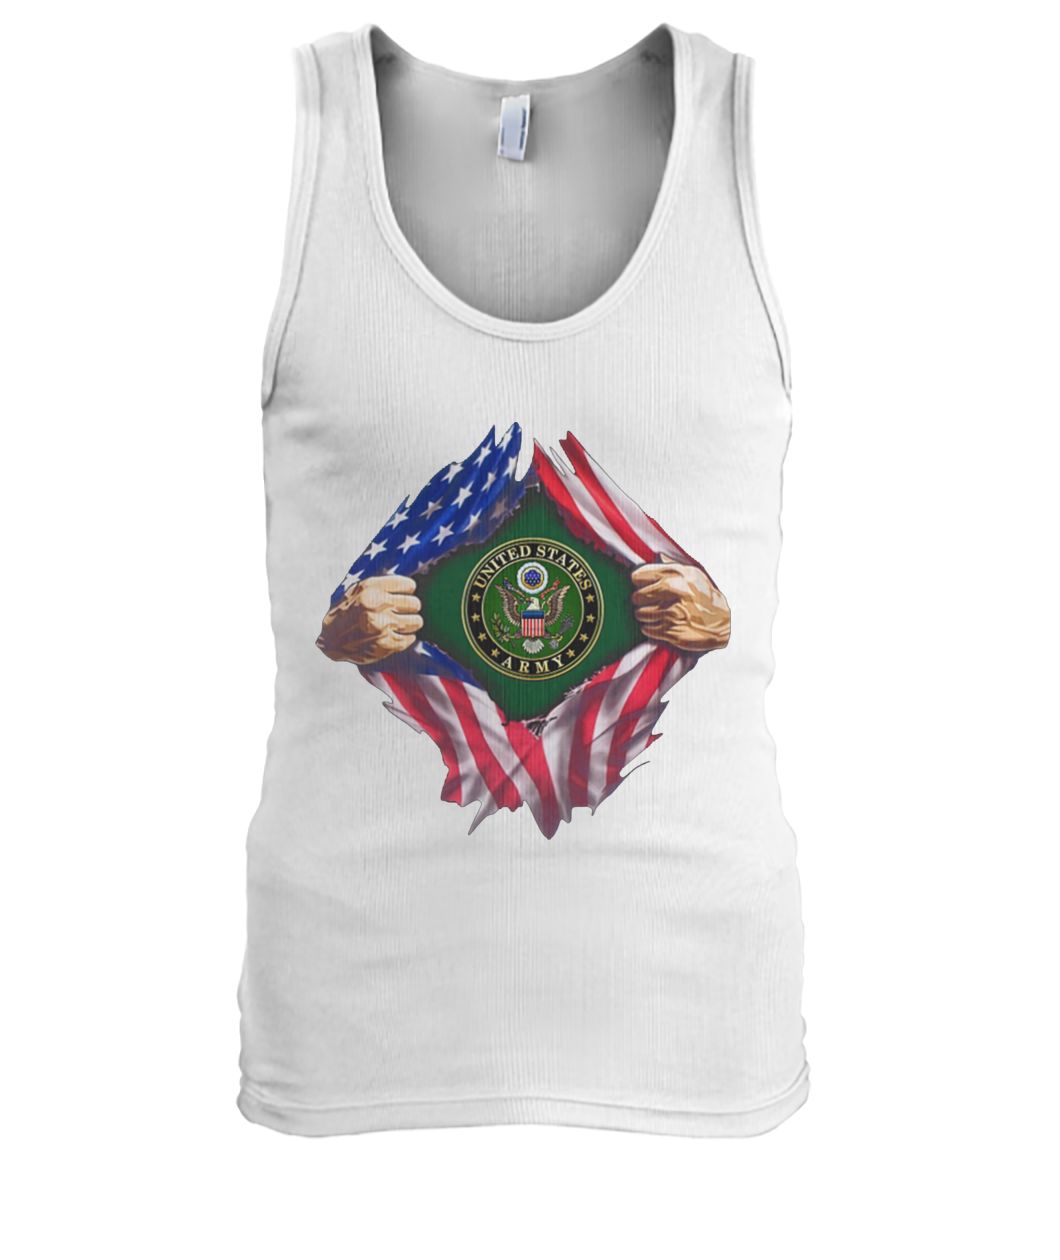 4th of july united states army inside american flag men's tank top